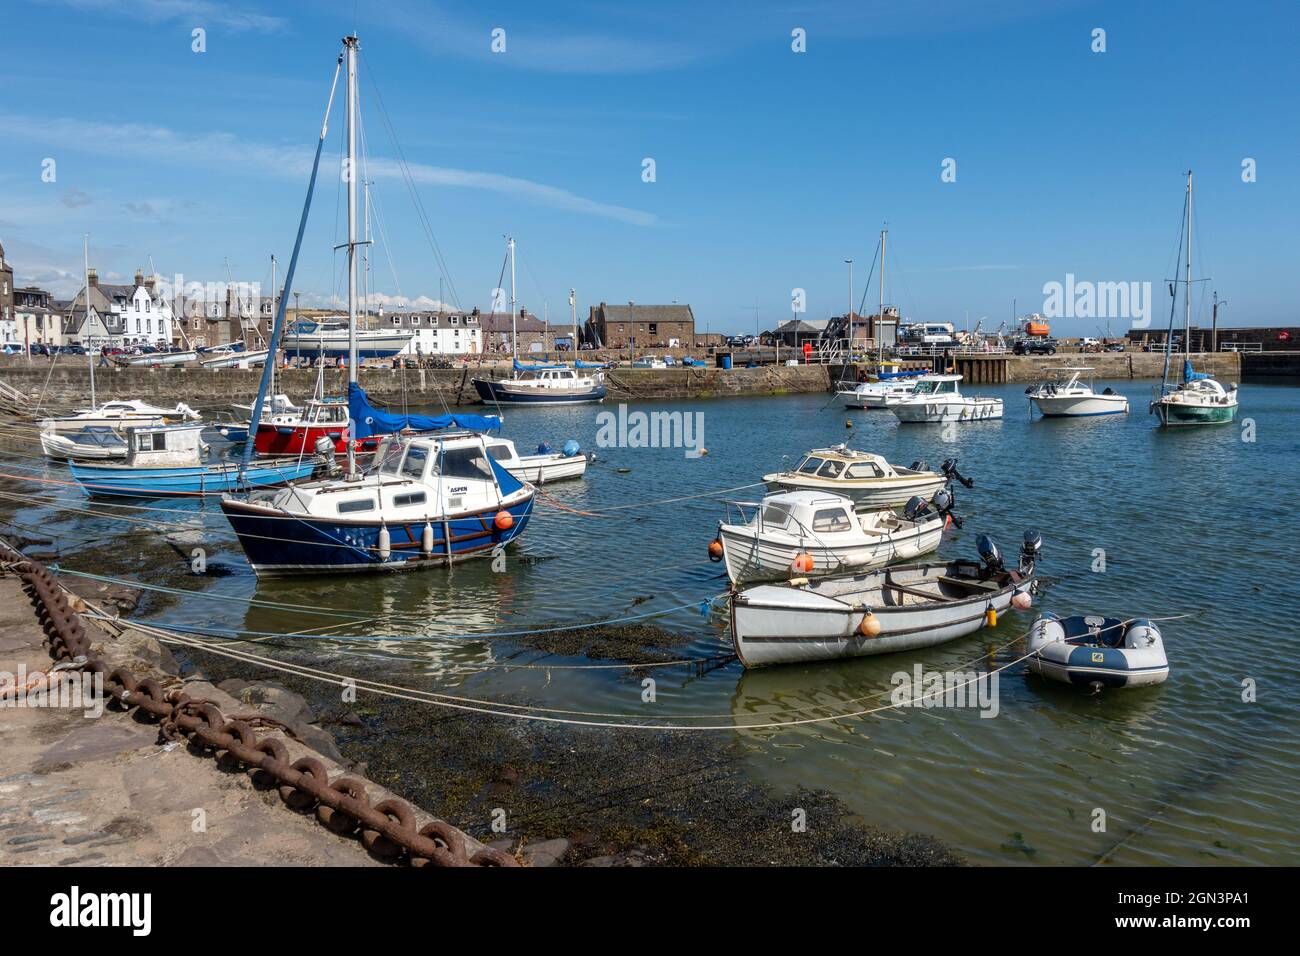 Boats moored in the picturesque harbour at Stonehaven in Aberdeenshire, Scotland. Stock Photo